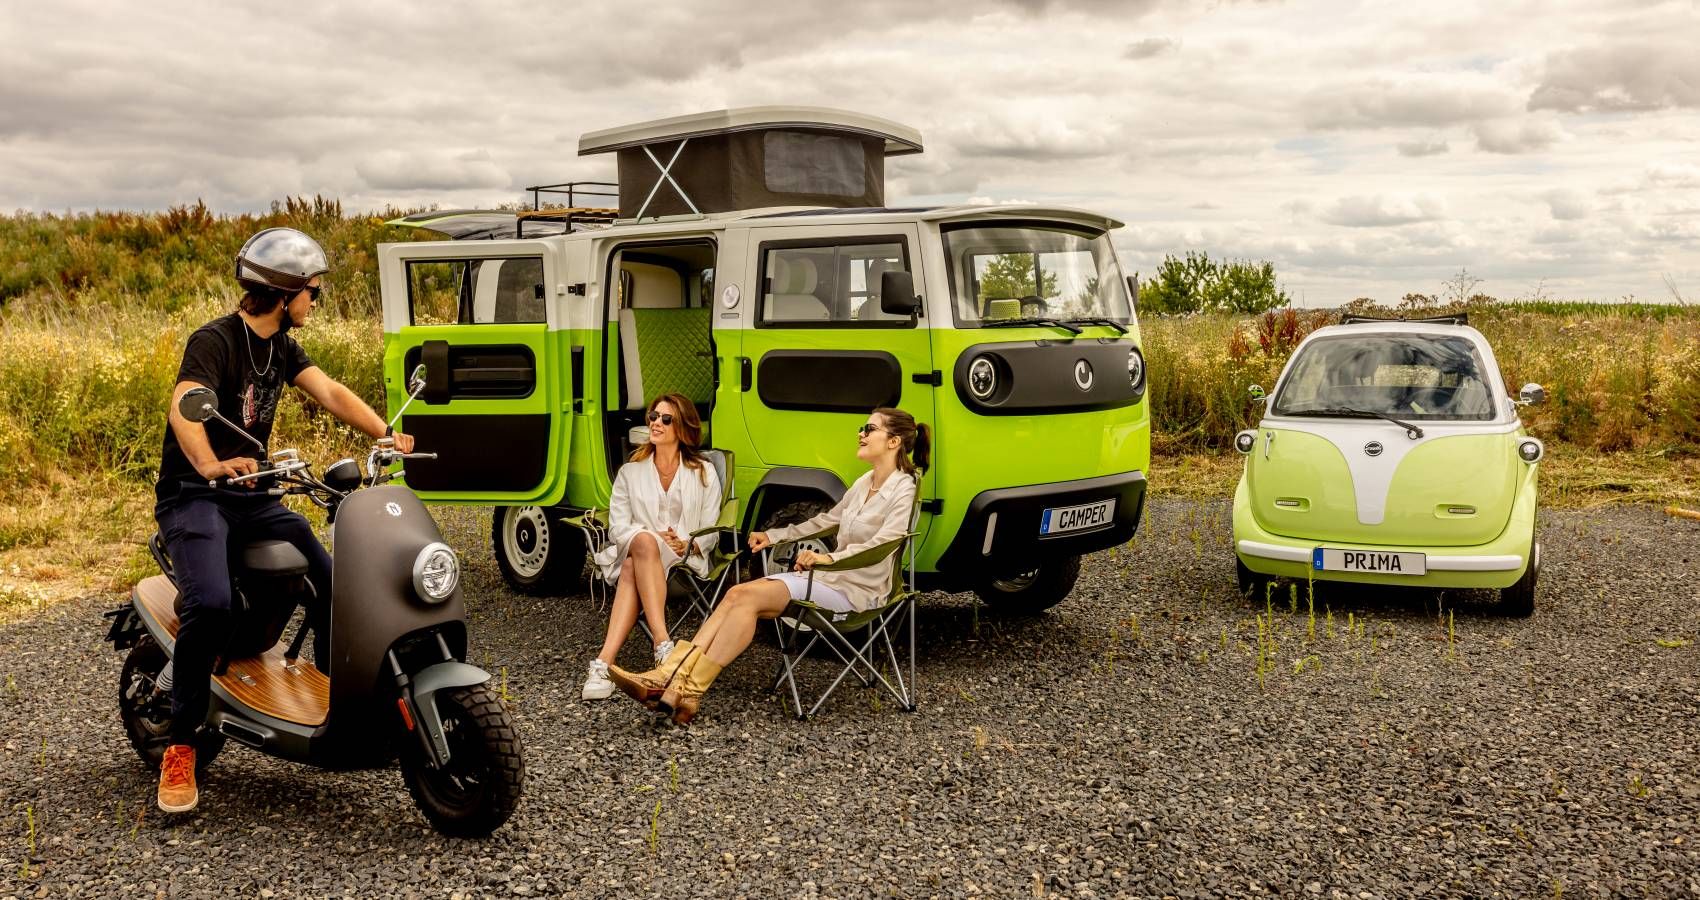 Why The XBUS Electric Camper Is The Perfect Budget RV That Money Can Buy